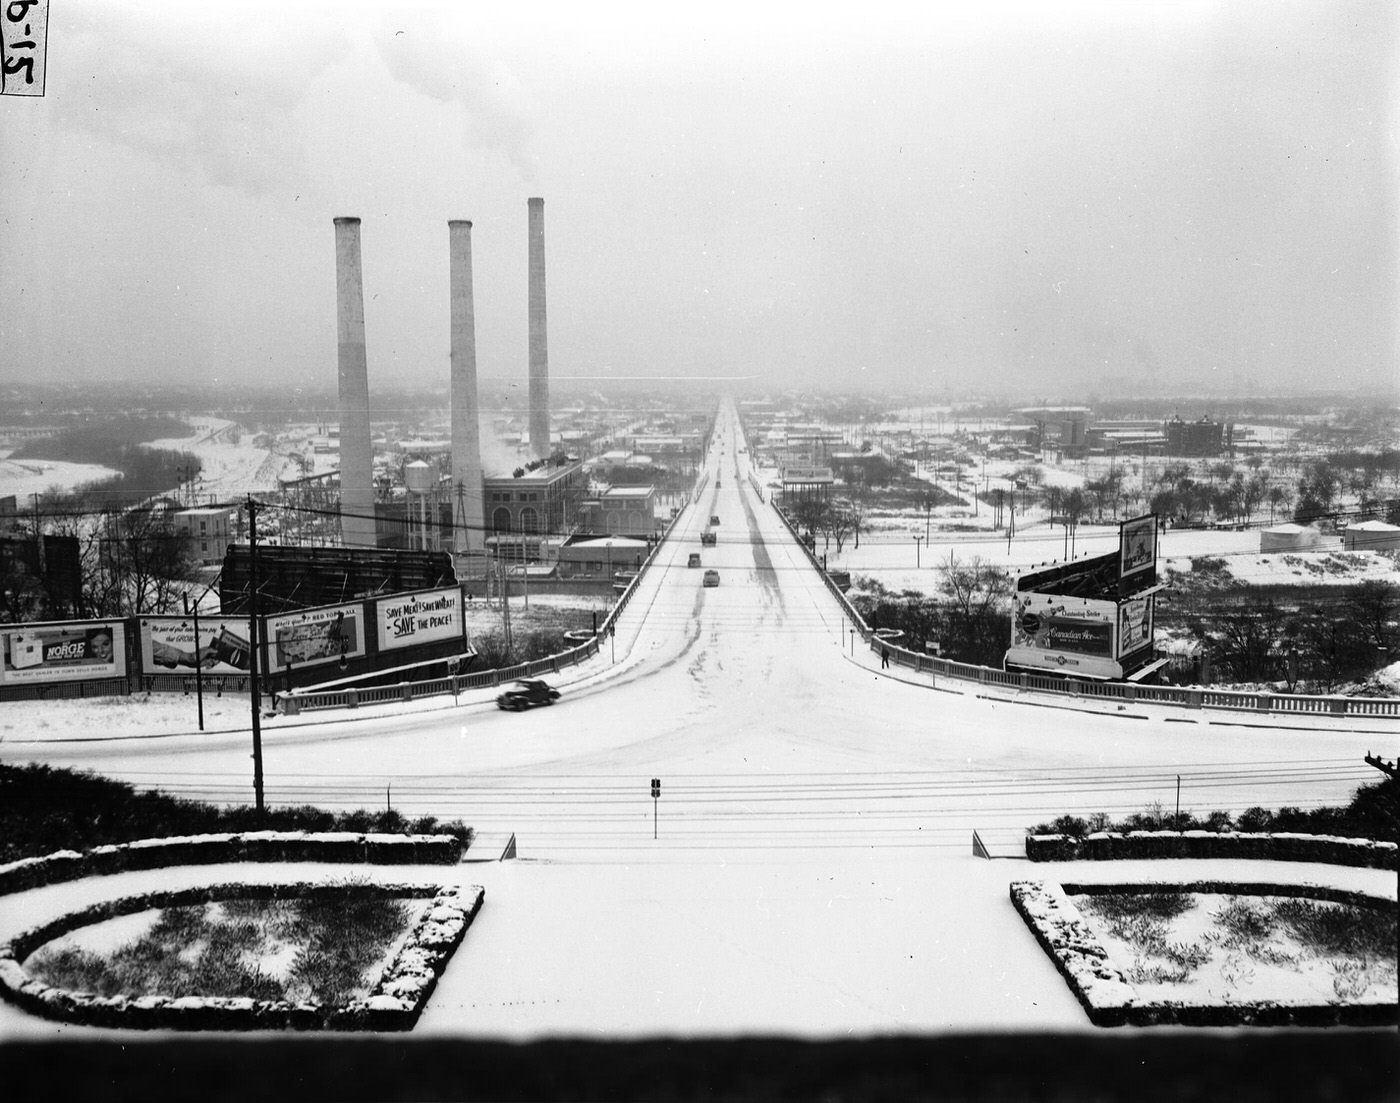 Tarrant County courthouse looking north on Fort Worth's Main Street with the snow covered Paddock Viaduct, 1948